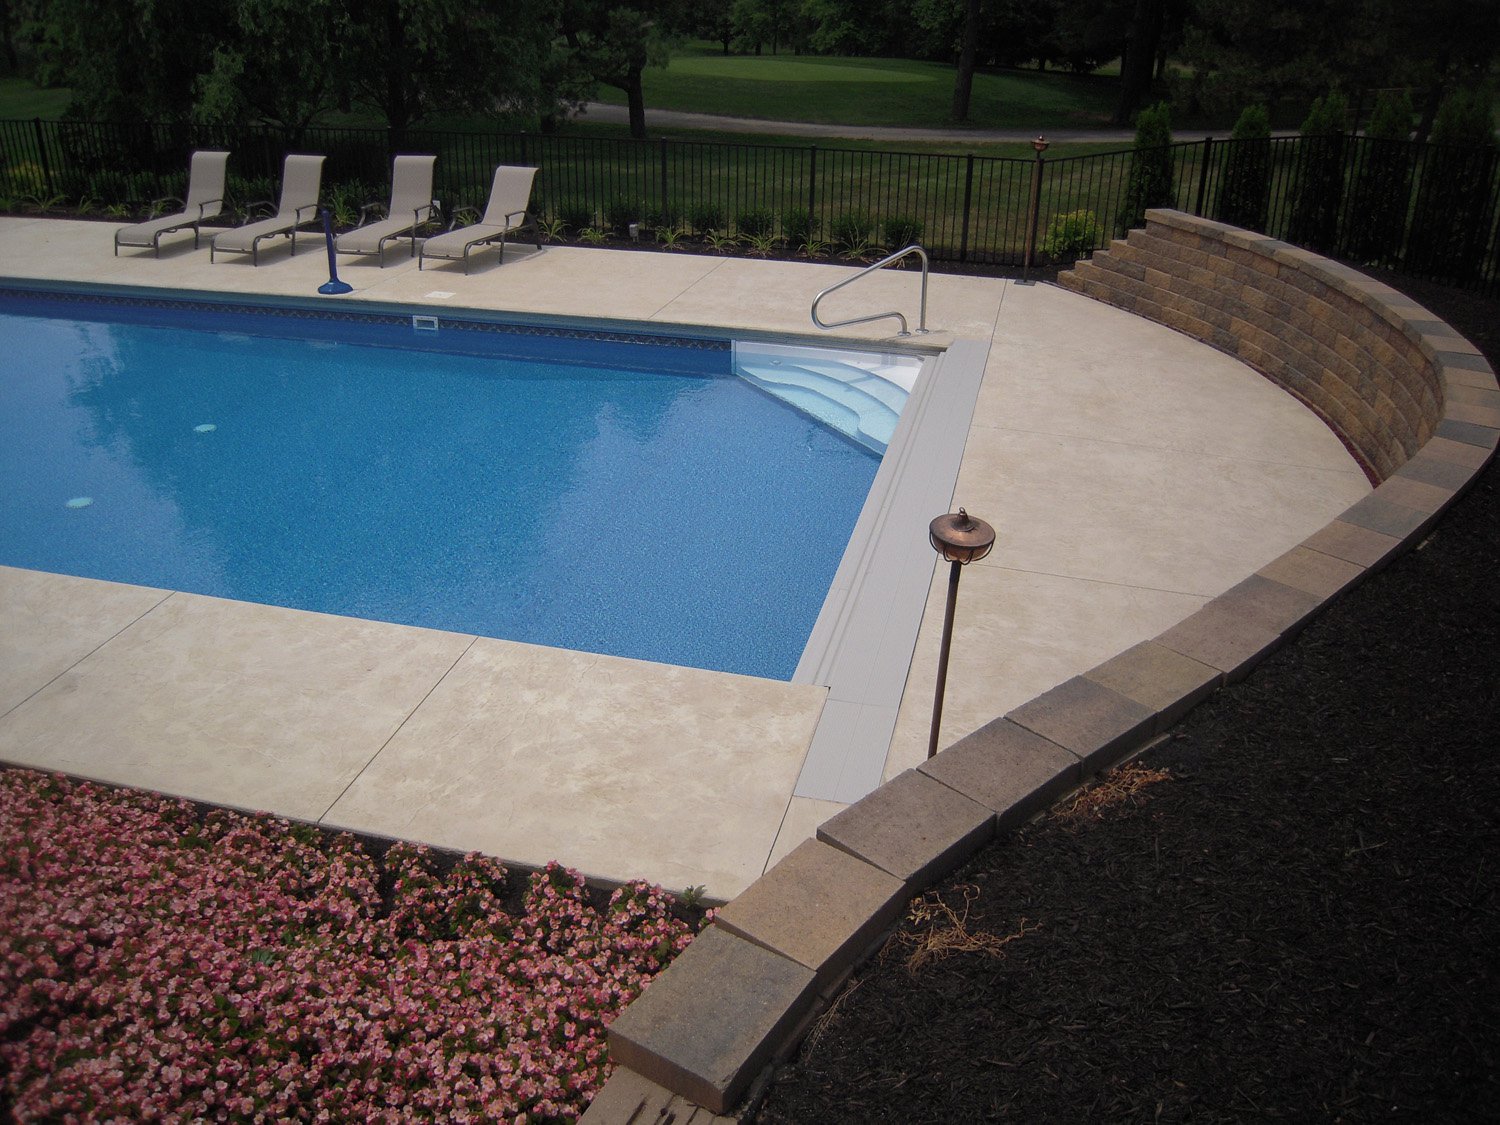 zb20x40___Rect___auto_cover___Swimming_pool___Vinyl___145 Envision Pools